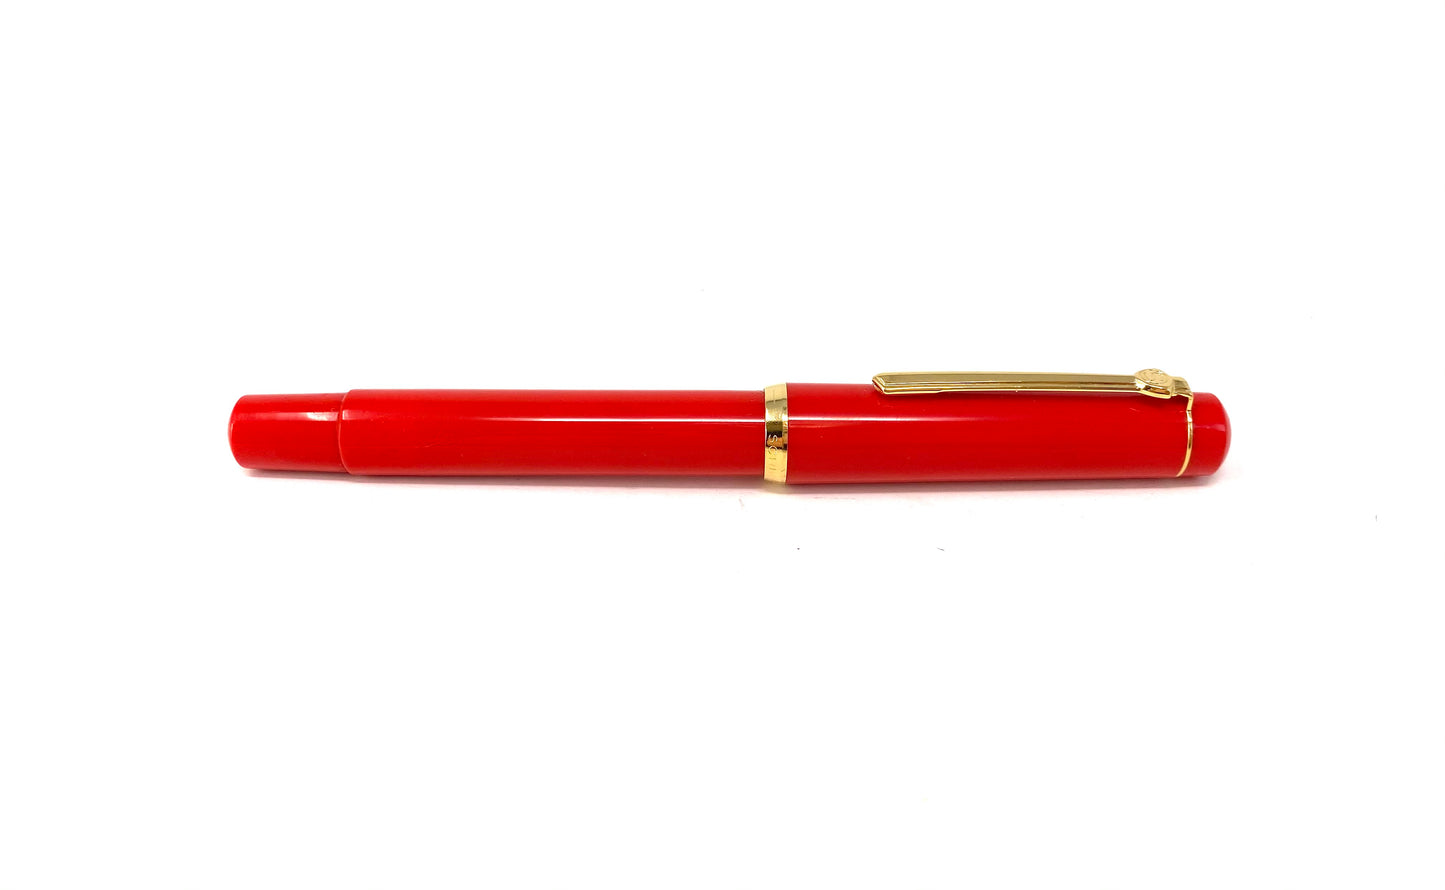 Limited Edition 419 Scrikss Fountain Pen - Red